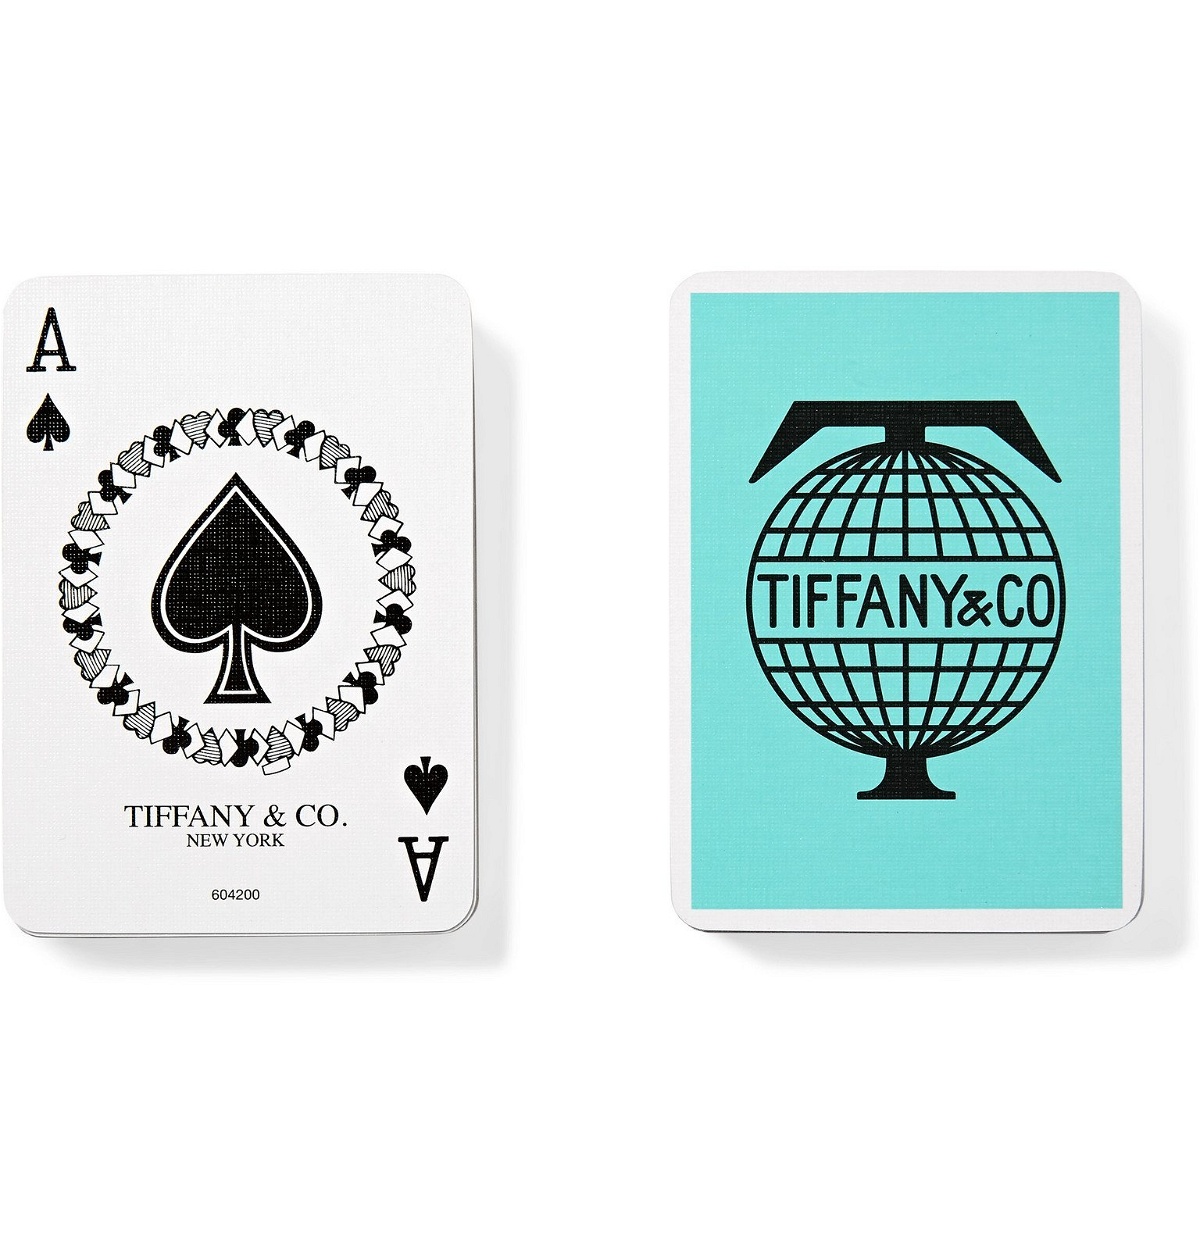 Cancelled - Tiffany & Co. Poker Set for sale or trade